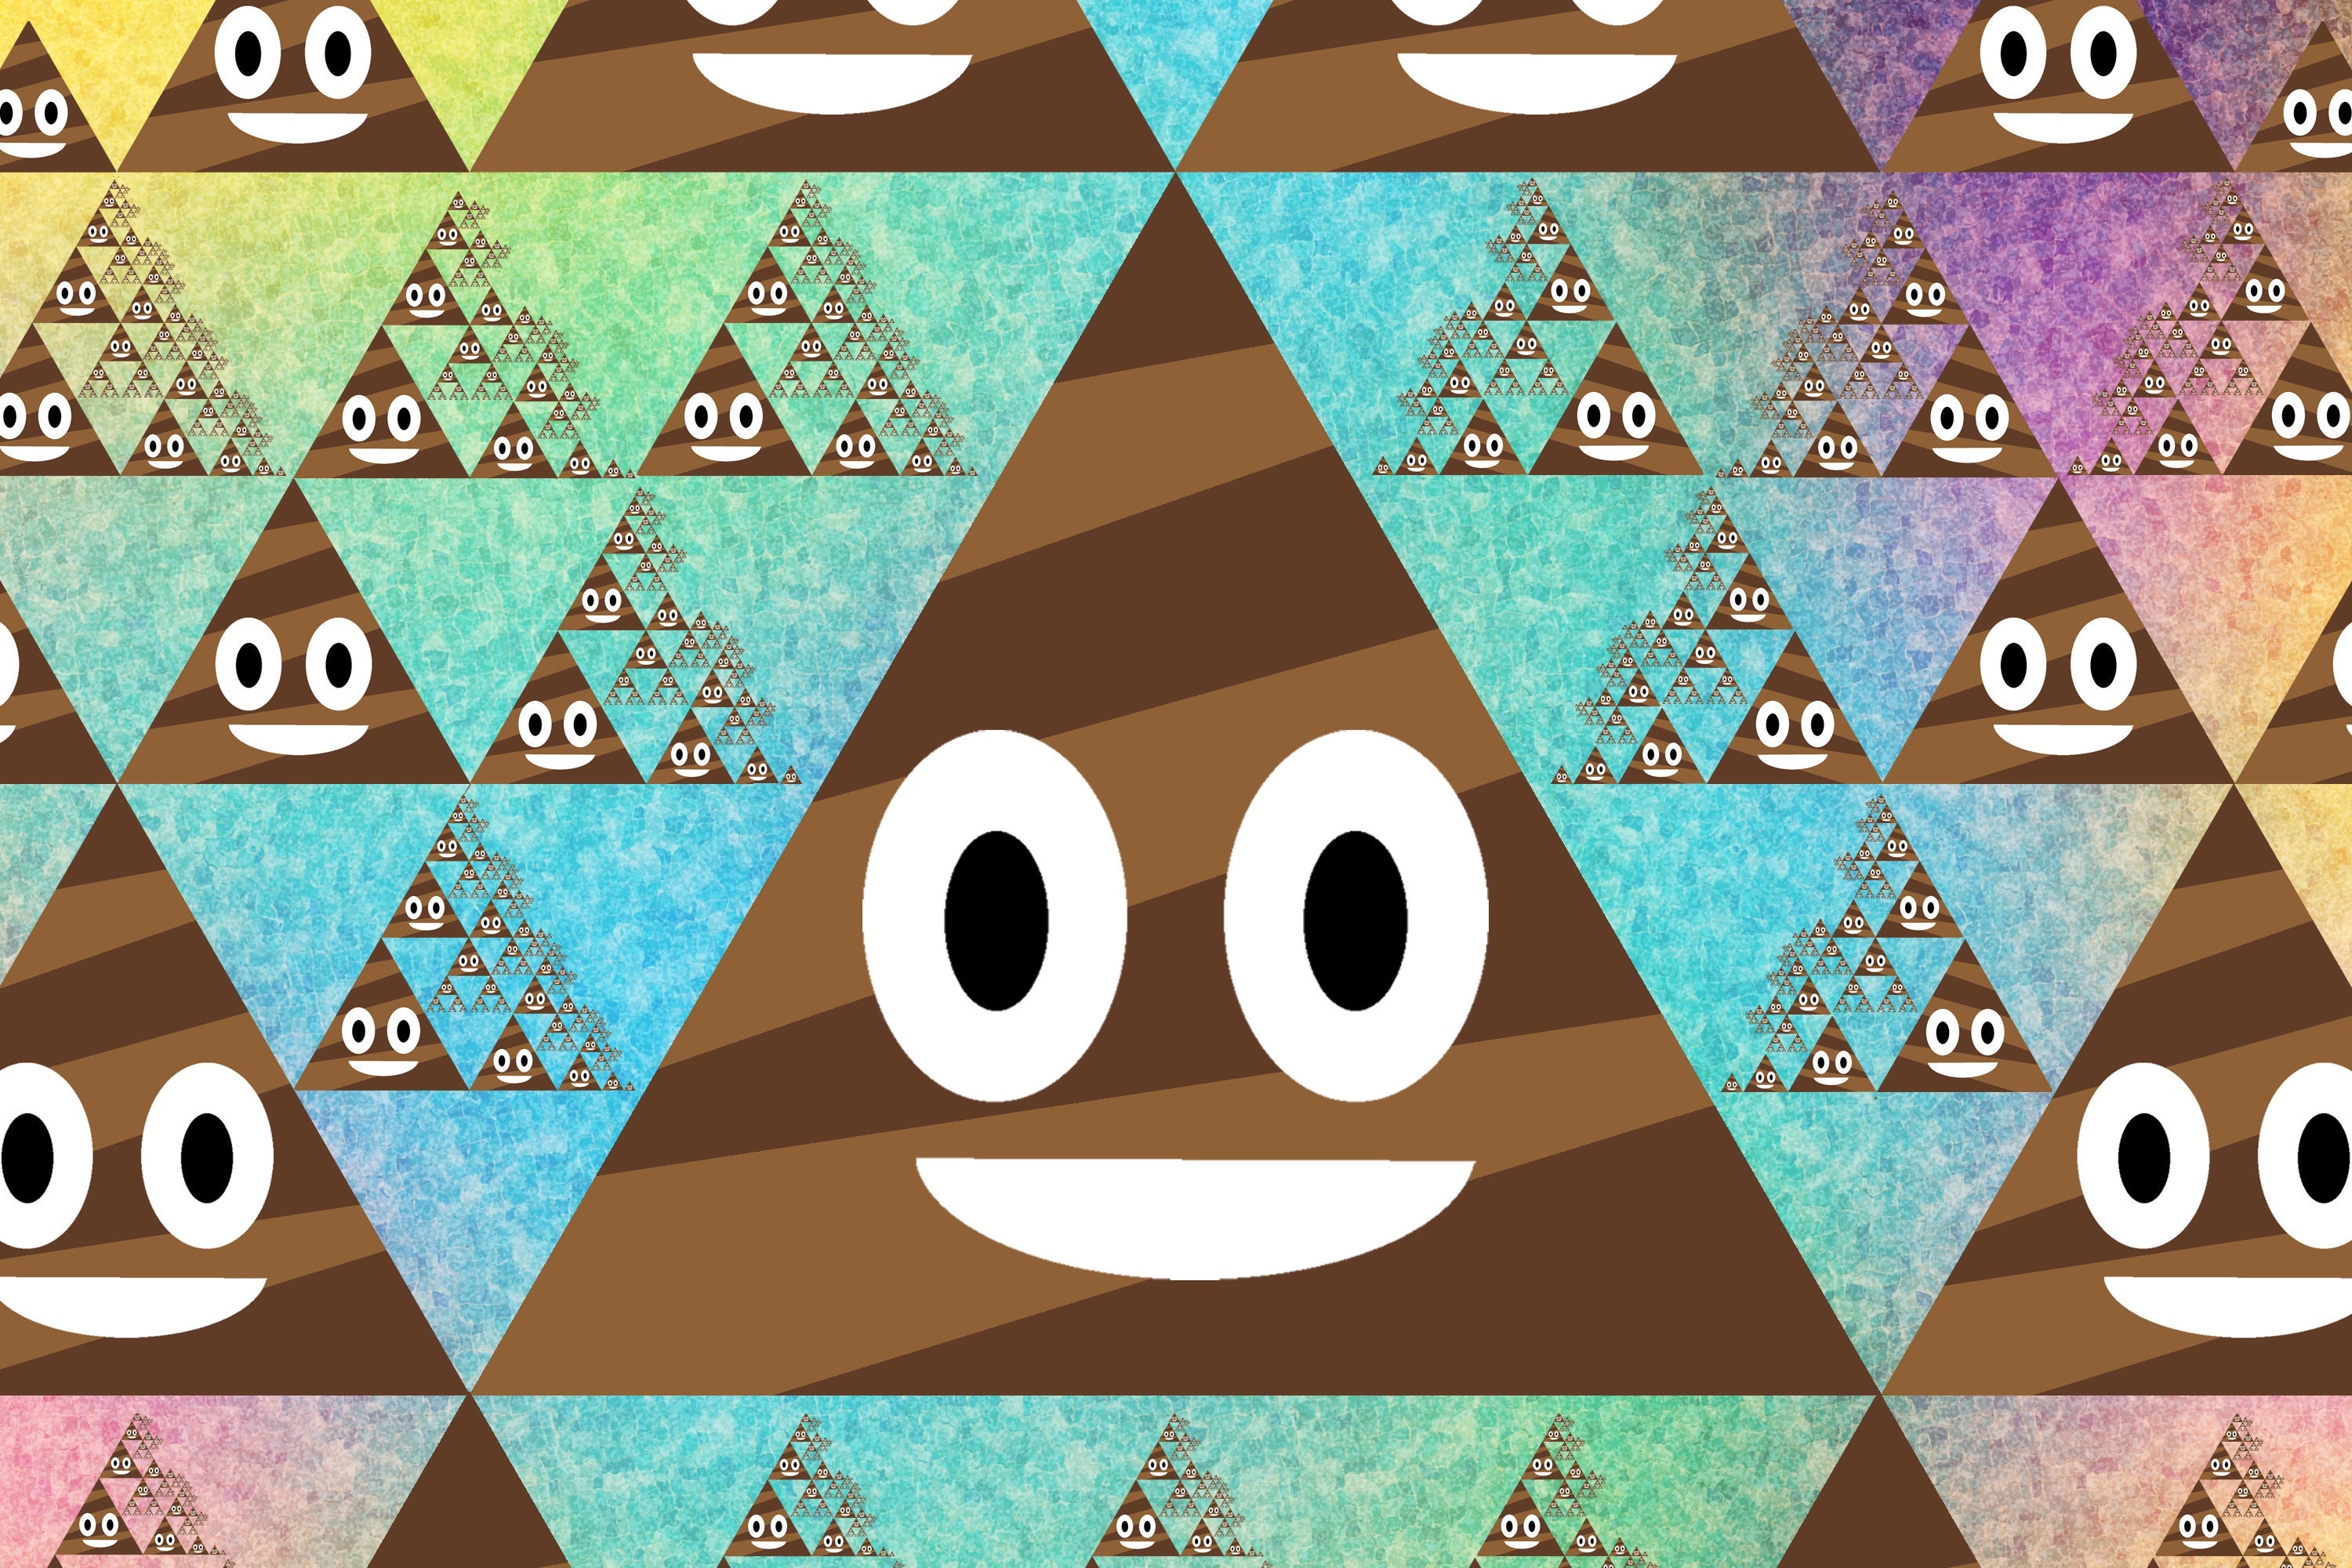 Smiling triangular poop images in a repeating pattern.